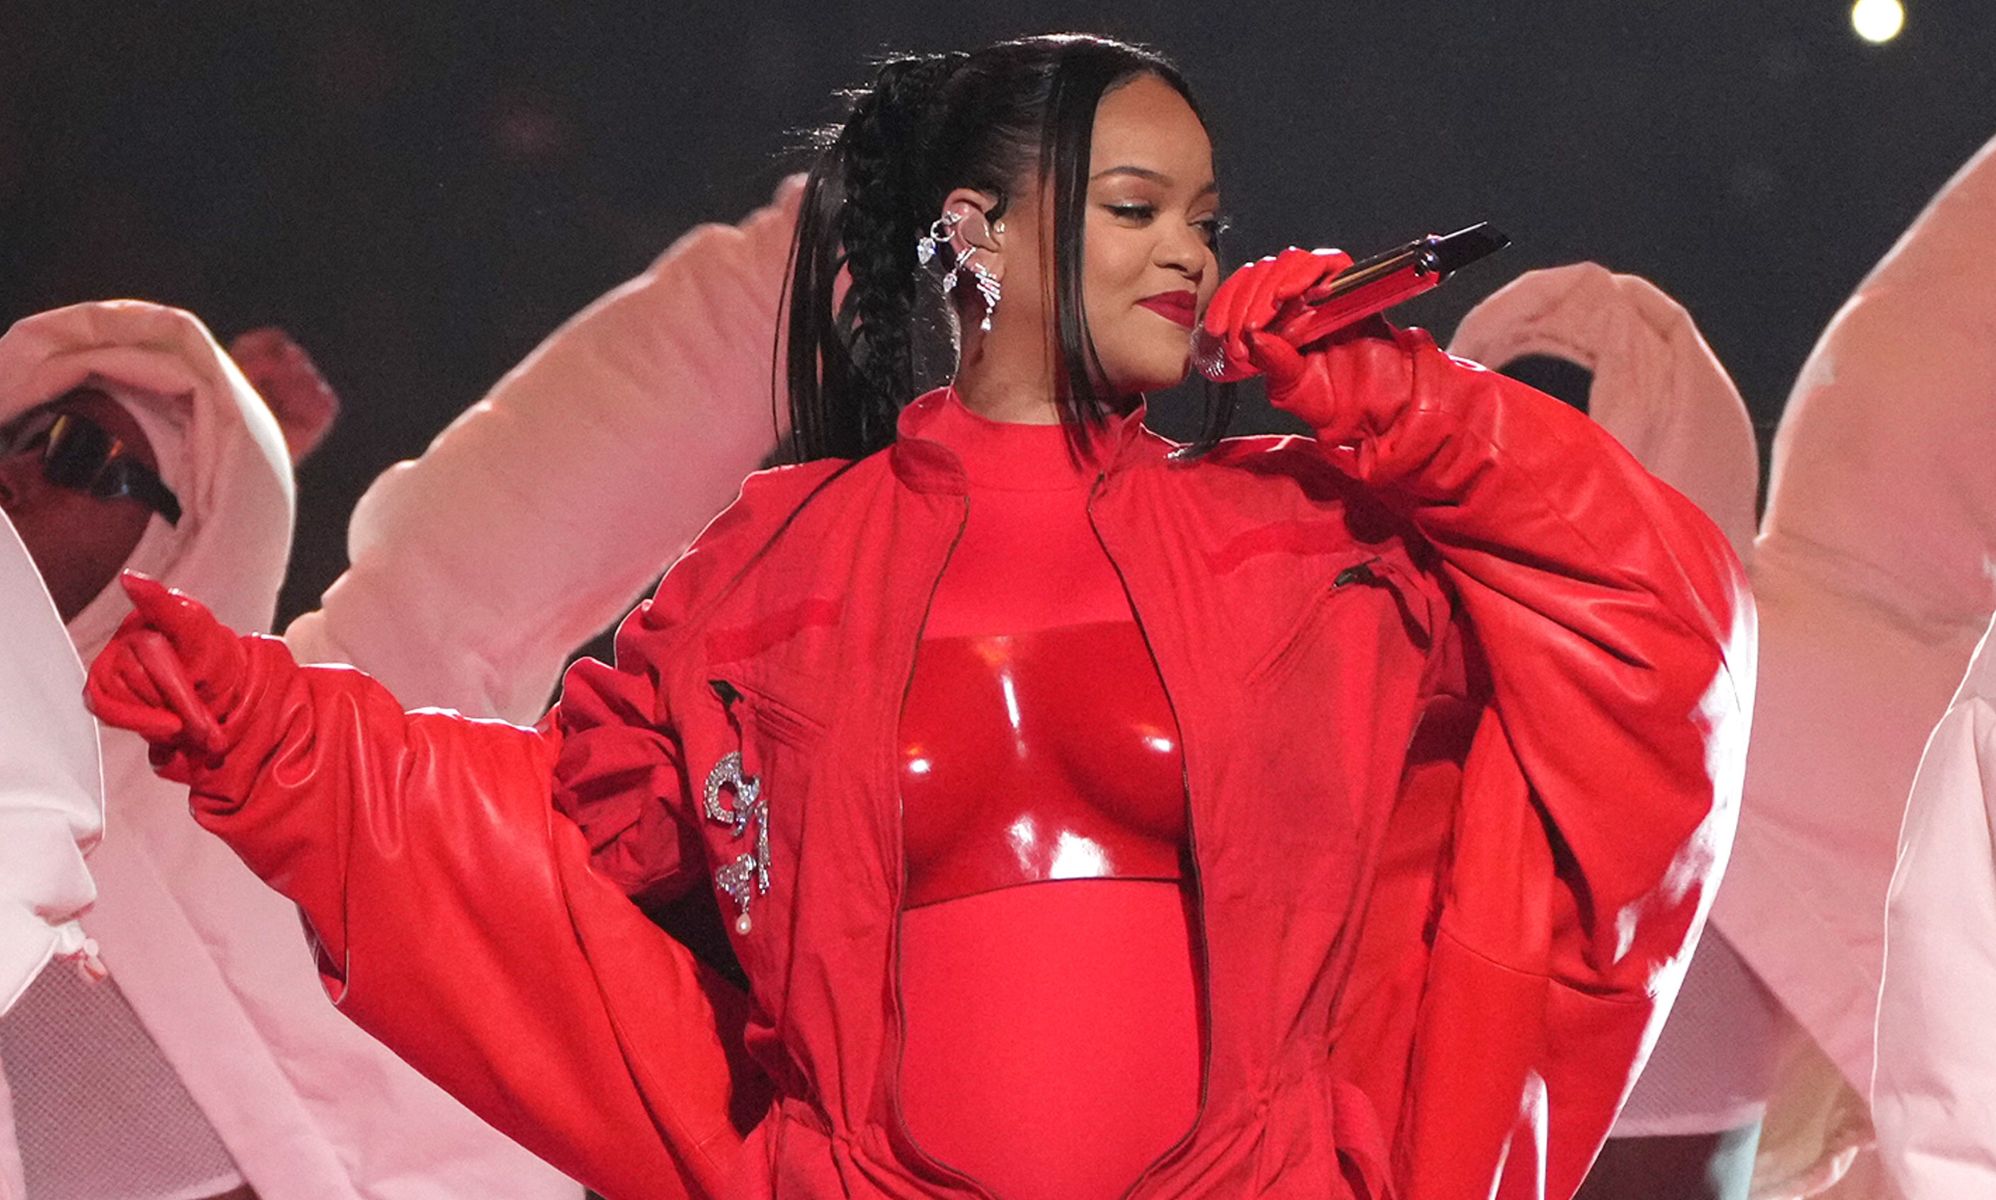 Rihanna confirms new album coming this year and opens up about 'toxic